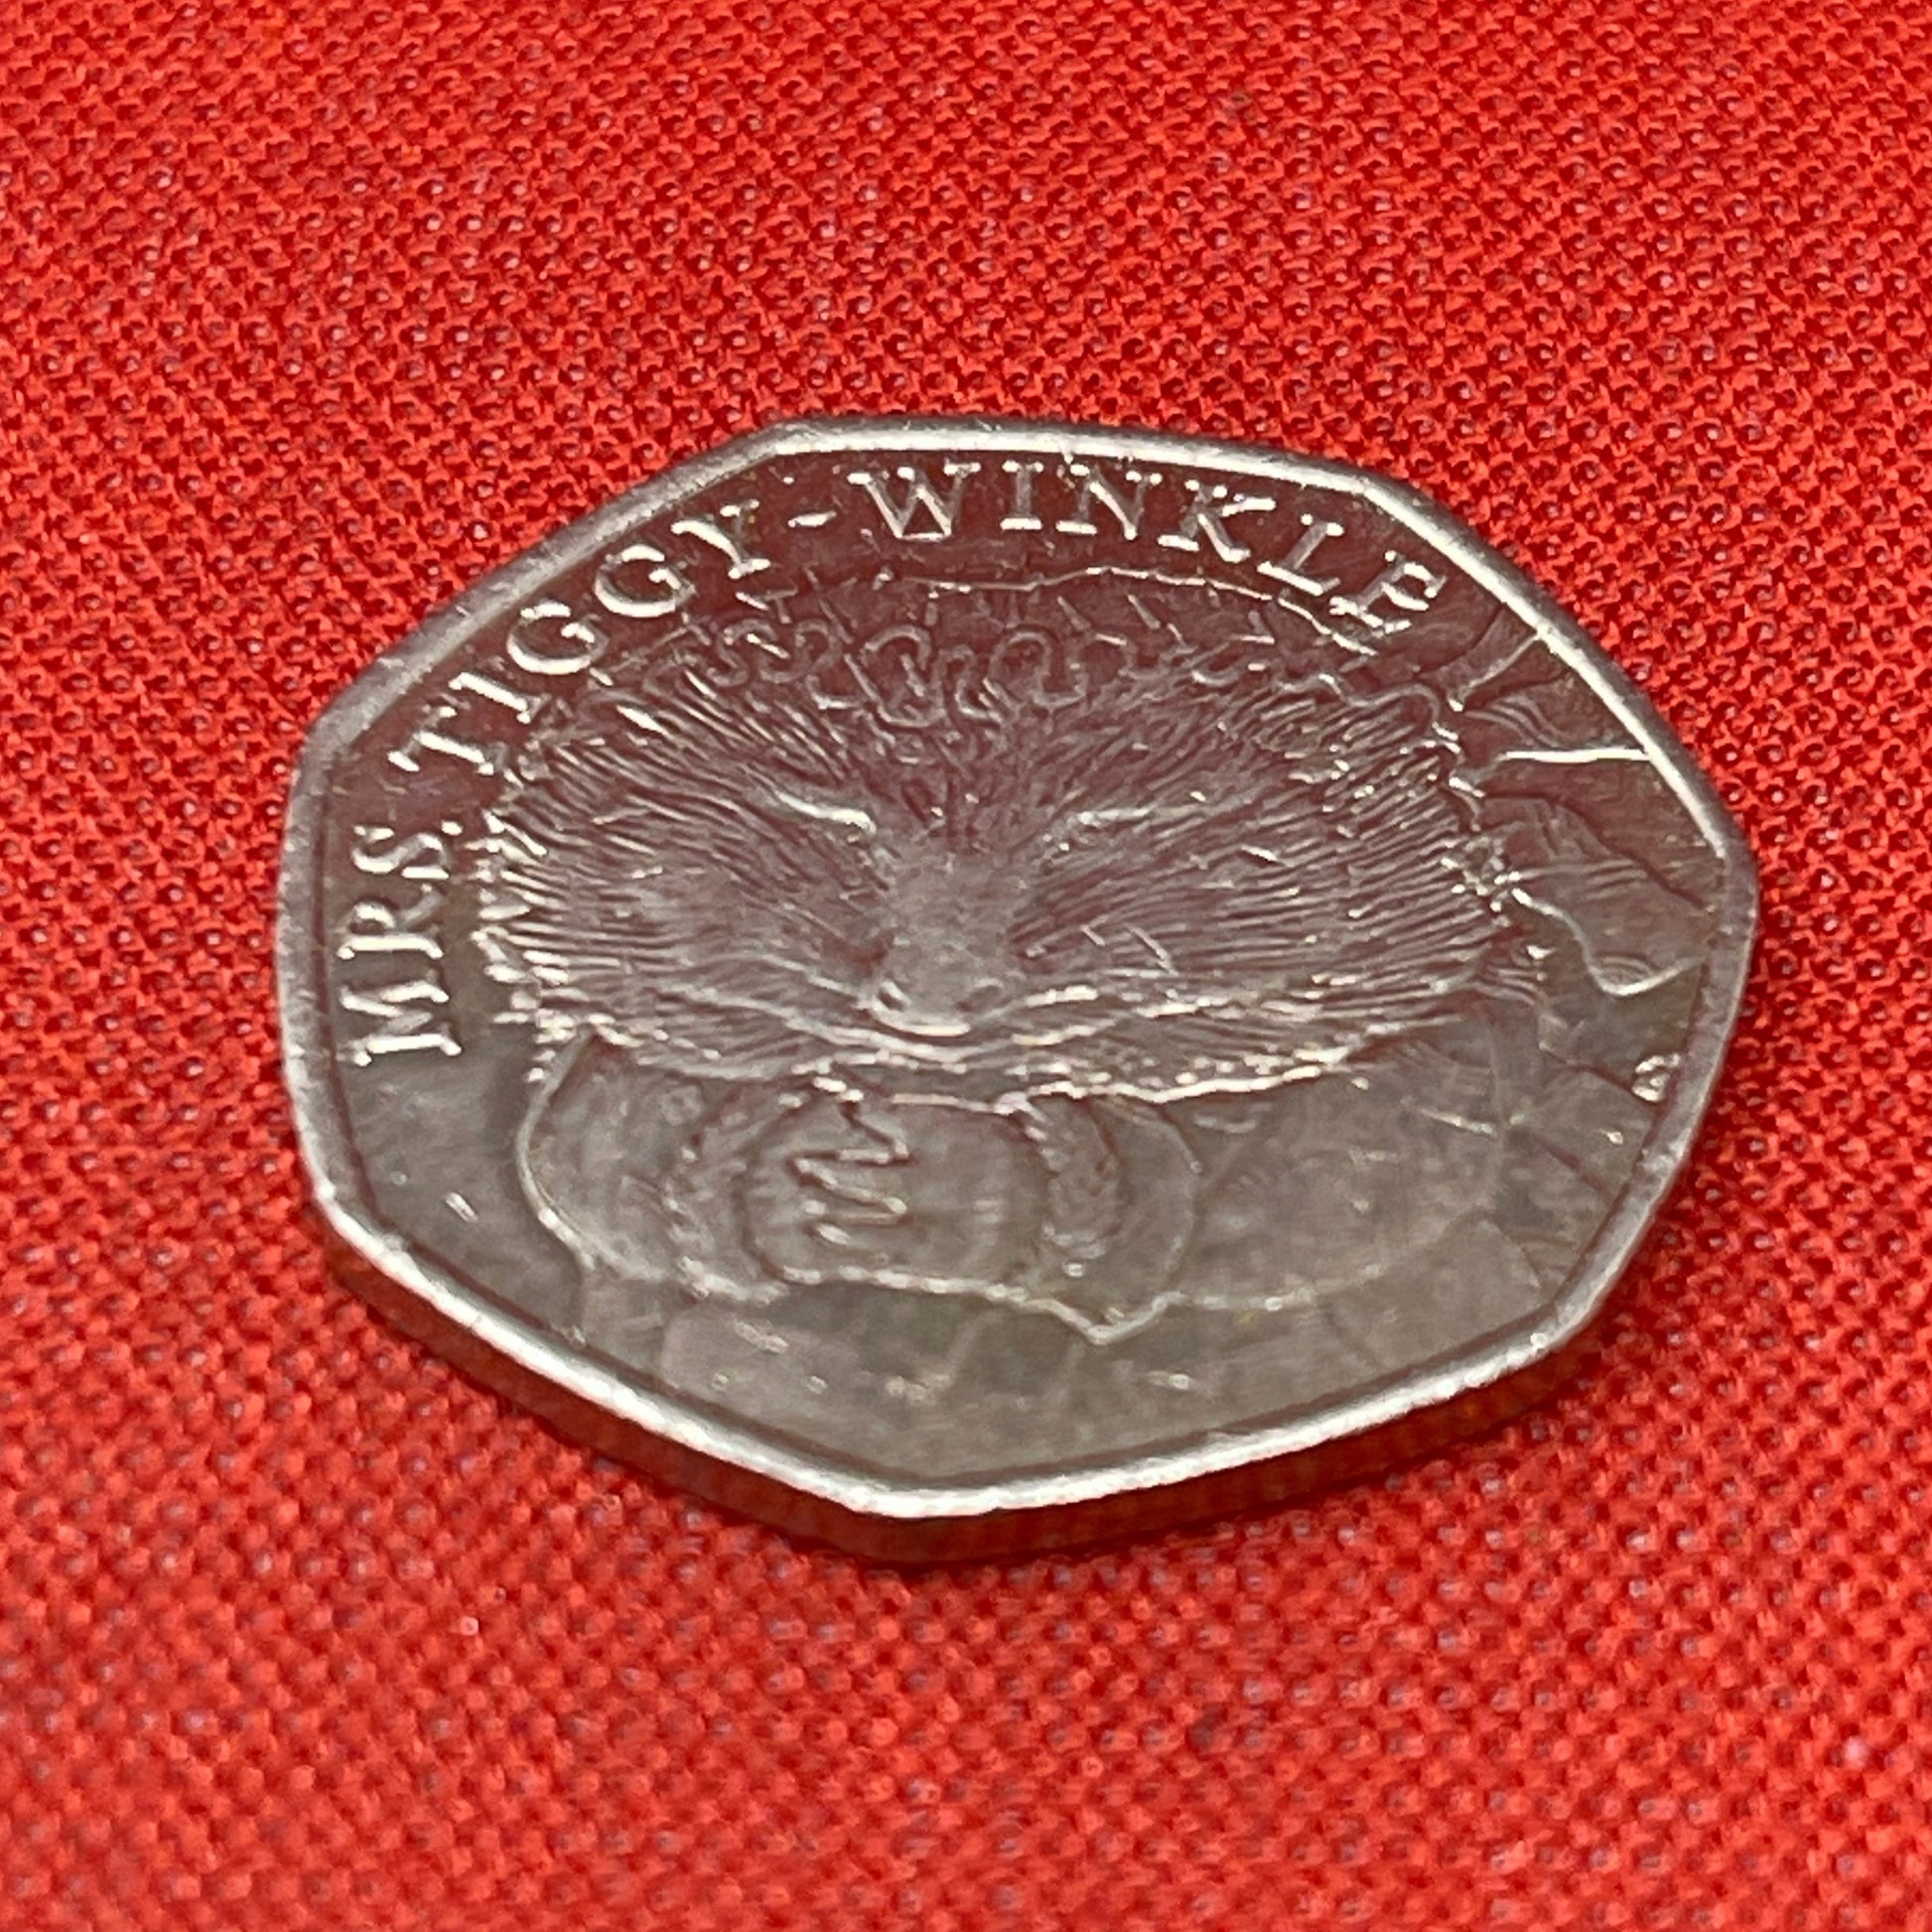 2016 Mrs Tiggy-Winkle 50p Fifty Pence Coin - Circulated